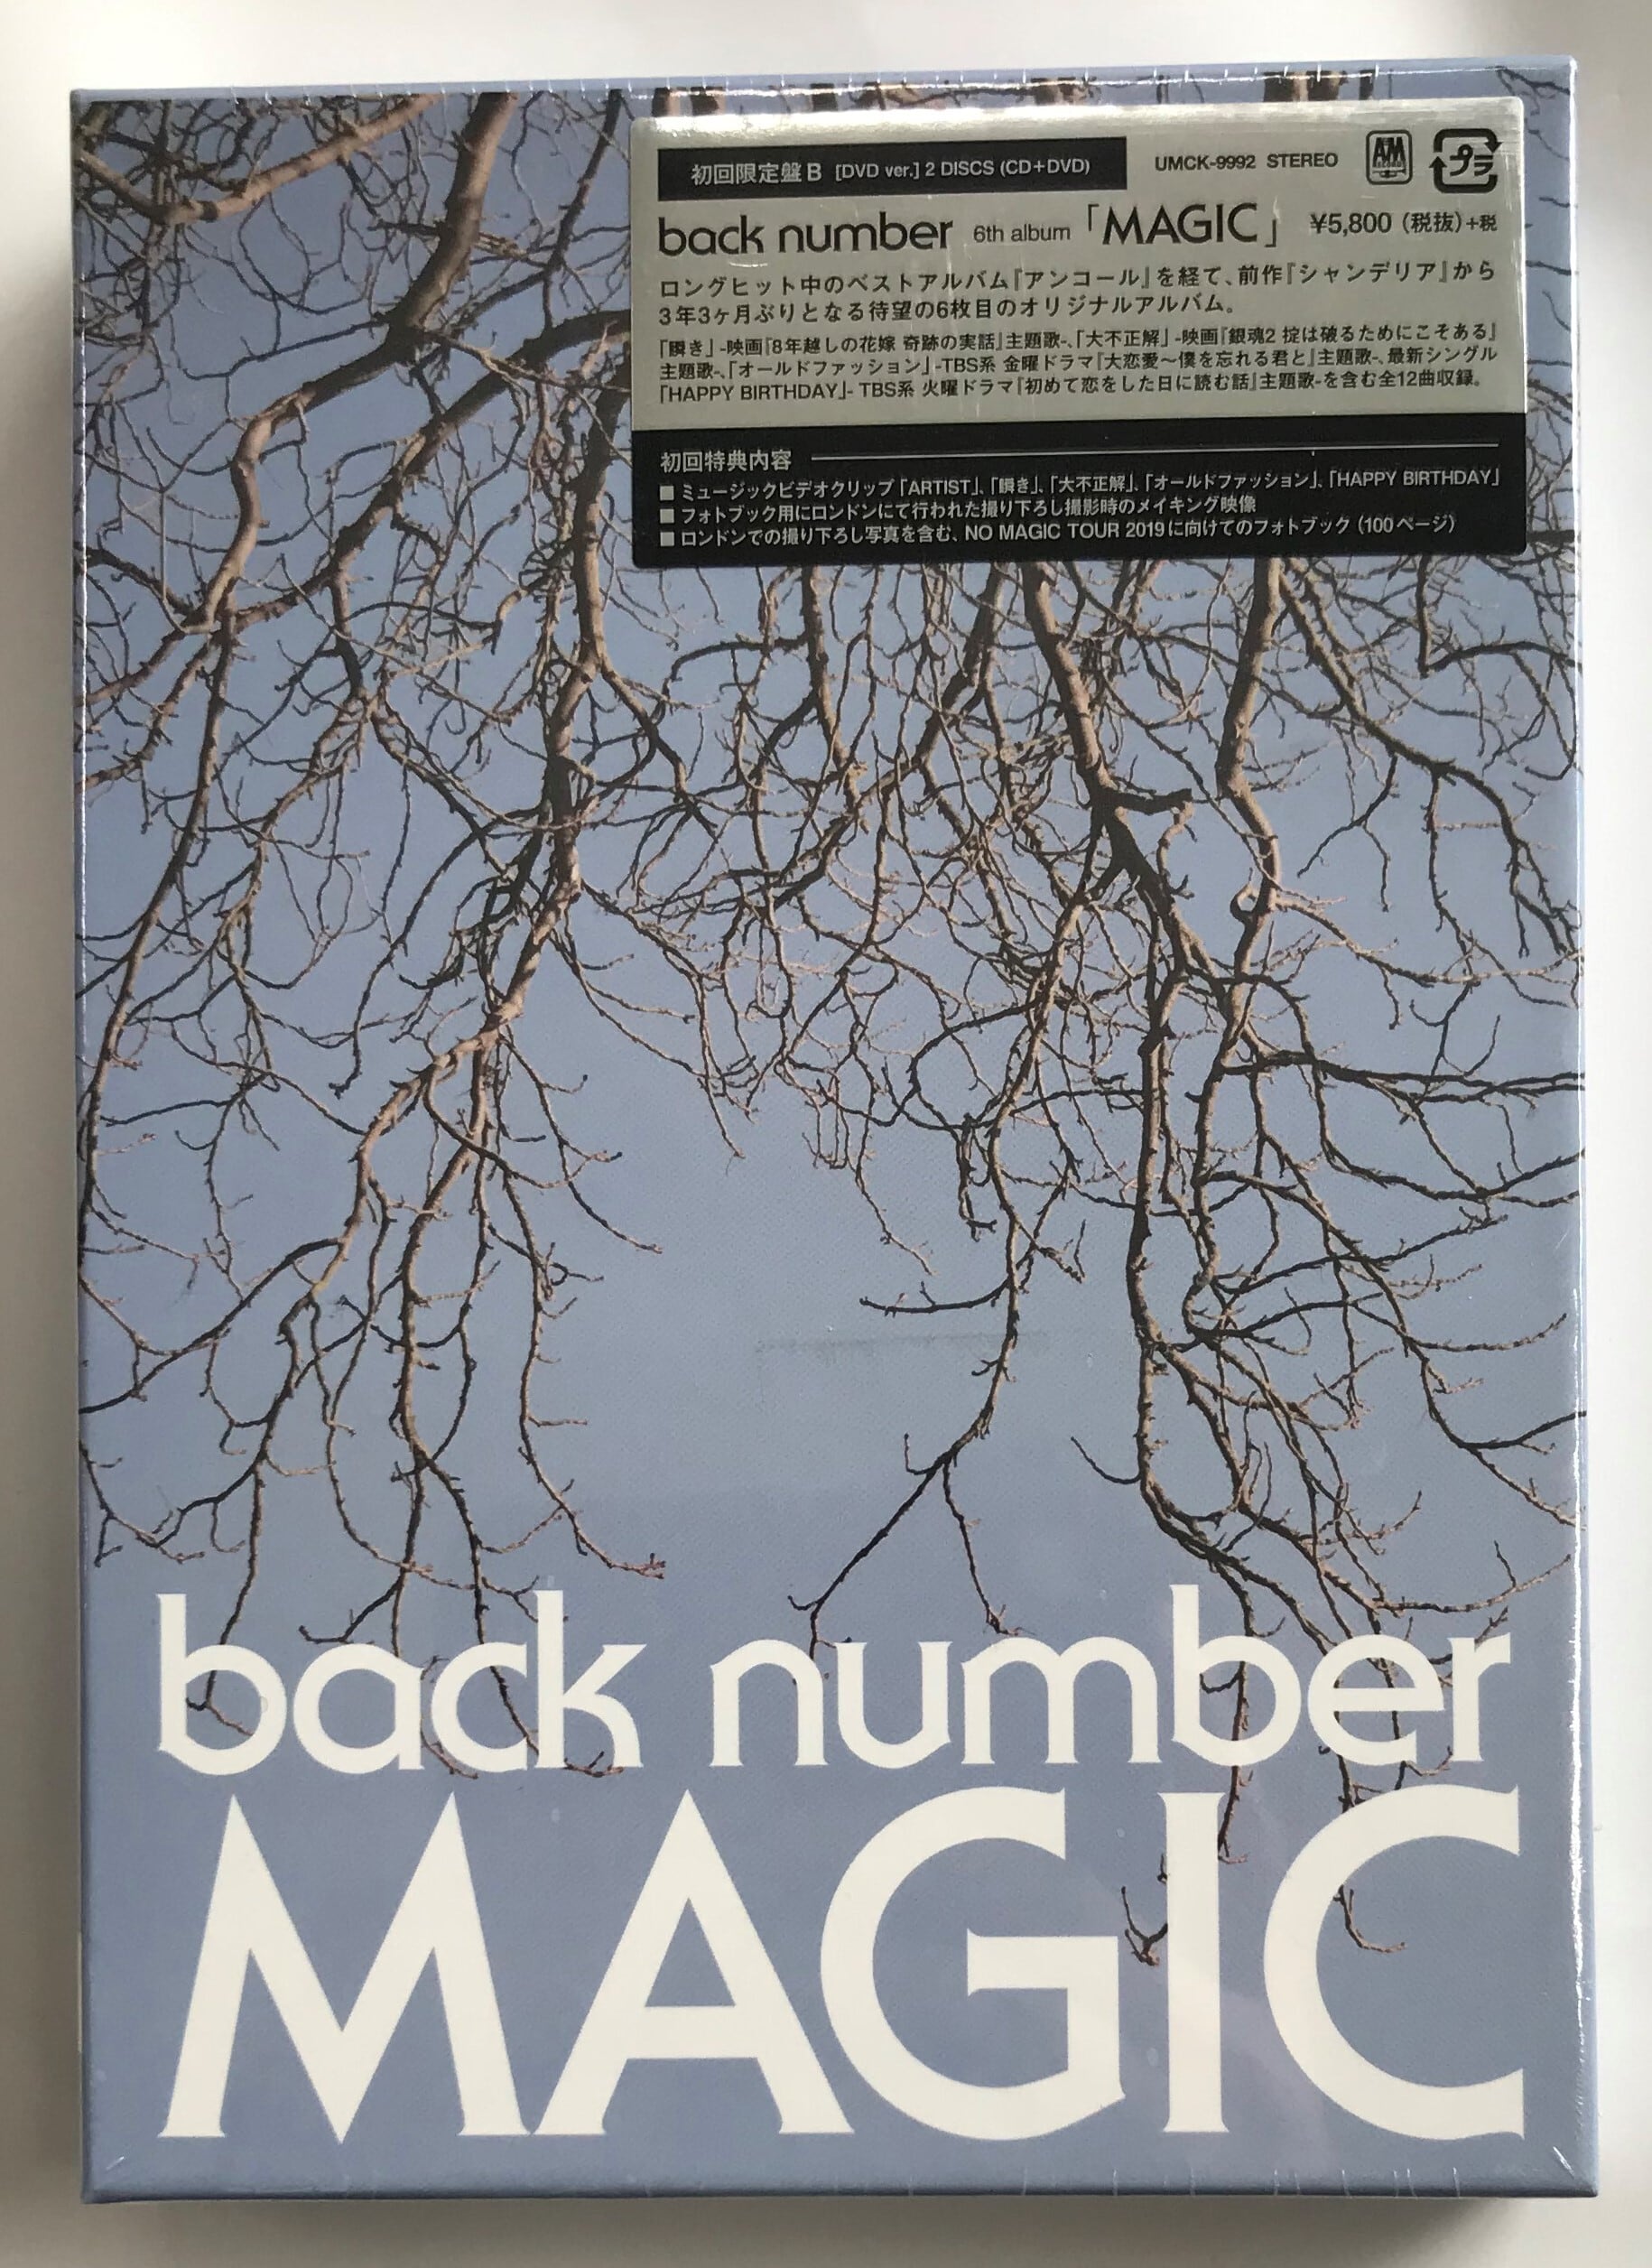 back number 黄色　CD DVD 初回限定盤 新品未使用ポップス/ロック(邦楽)